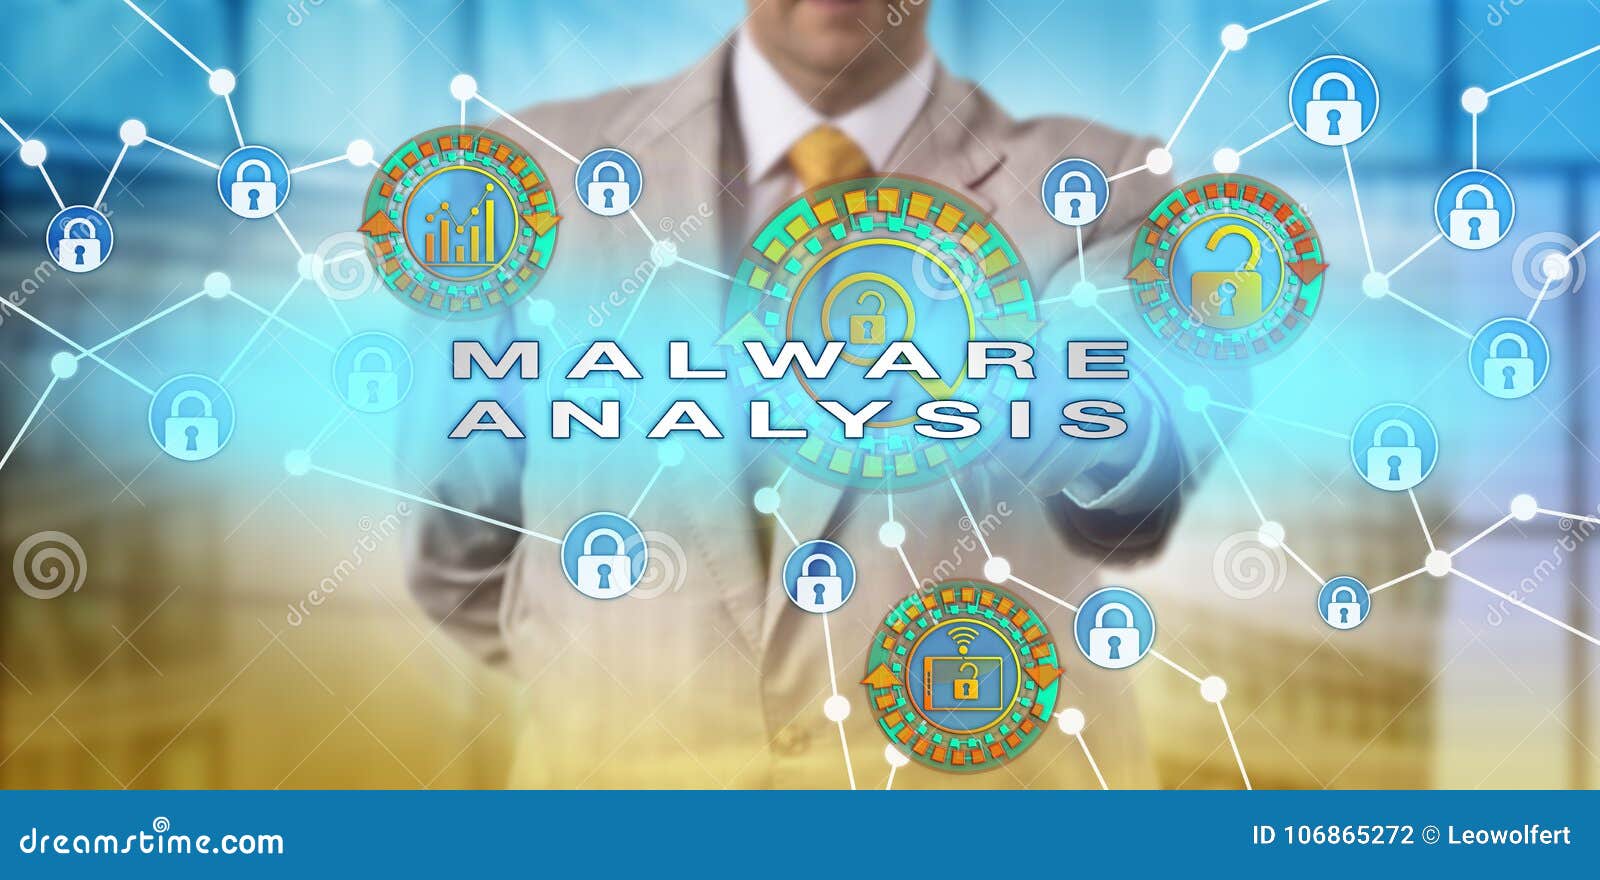 incident manager performing malware analysis